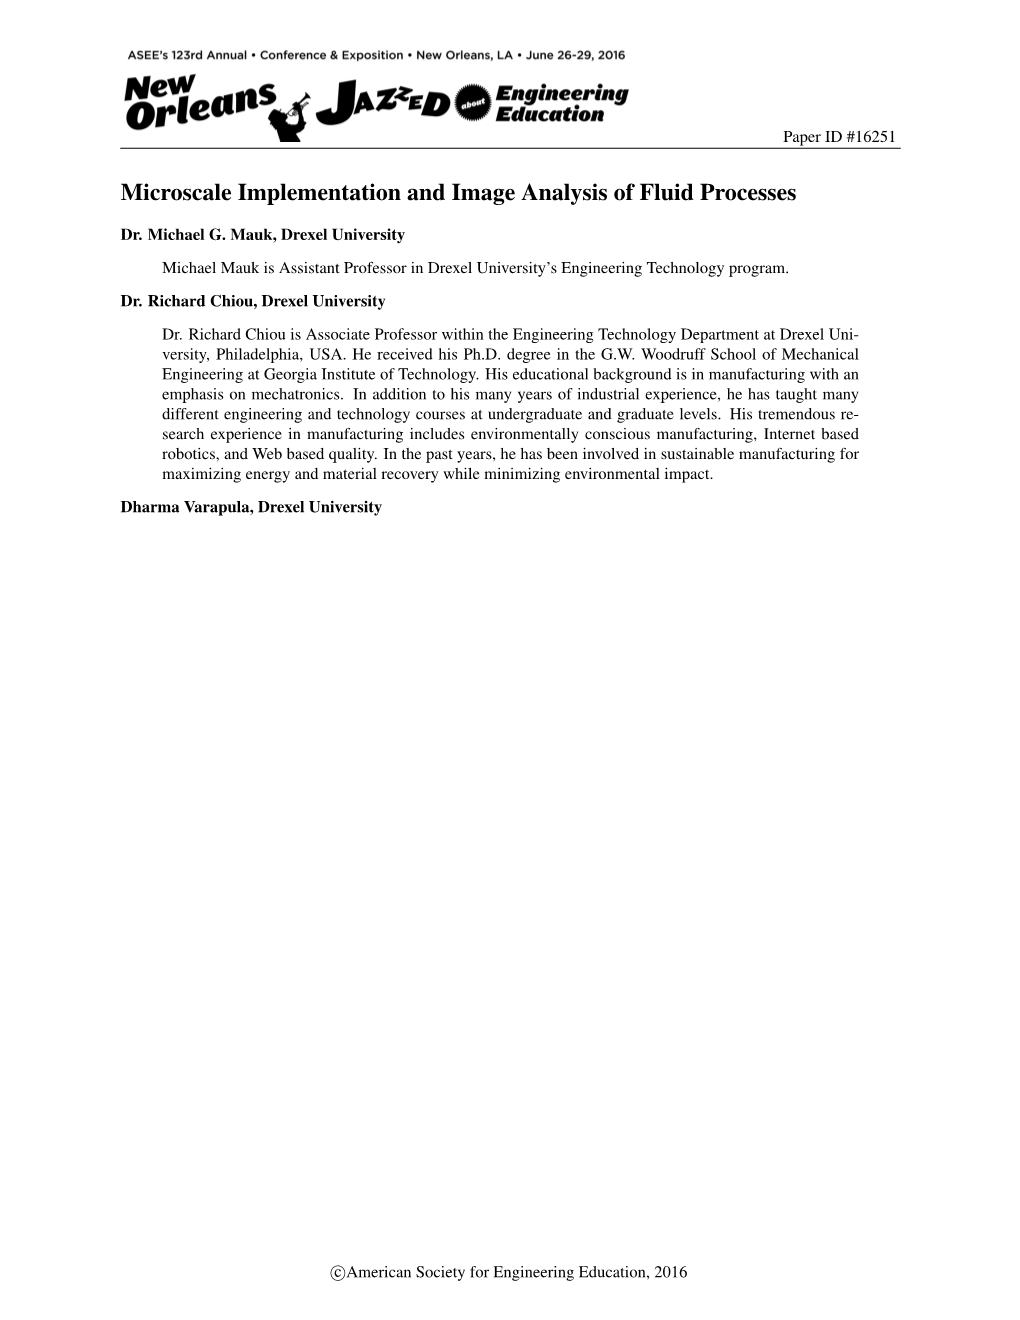 Microscale Implementation and Image Analysis of Fluid Processes